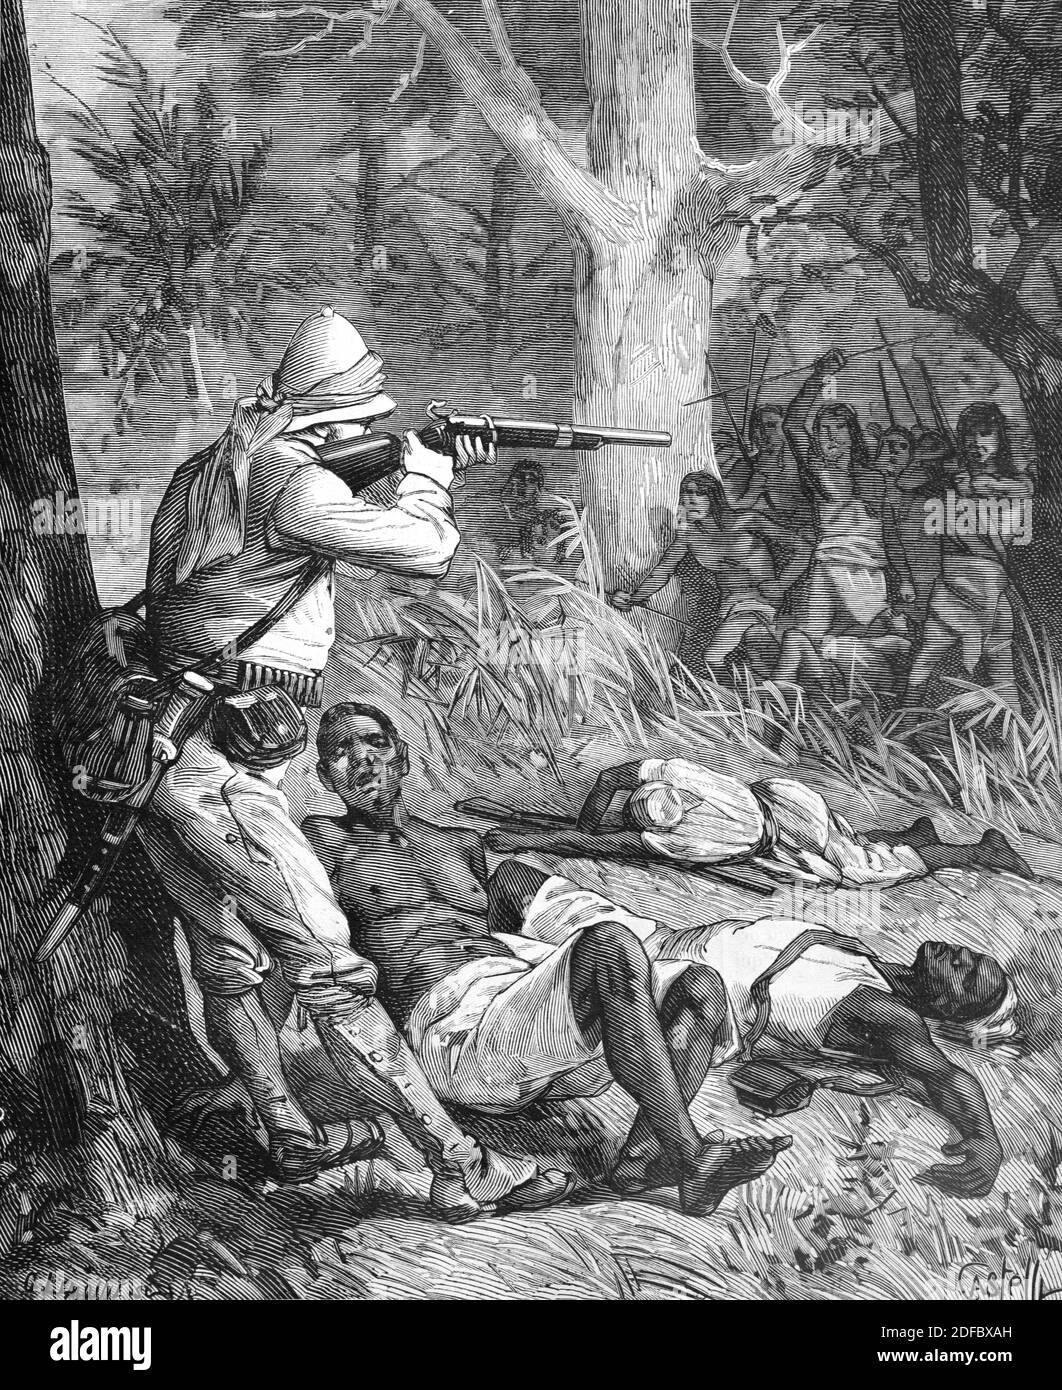 Confrontation in Colonial Africa Between European Colonial and Africans or African Tribe (Engr Castelli 1884) Vintage Illustration or Engraving Stock Photo